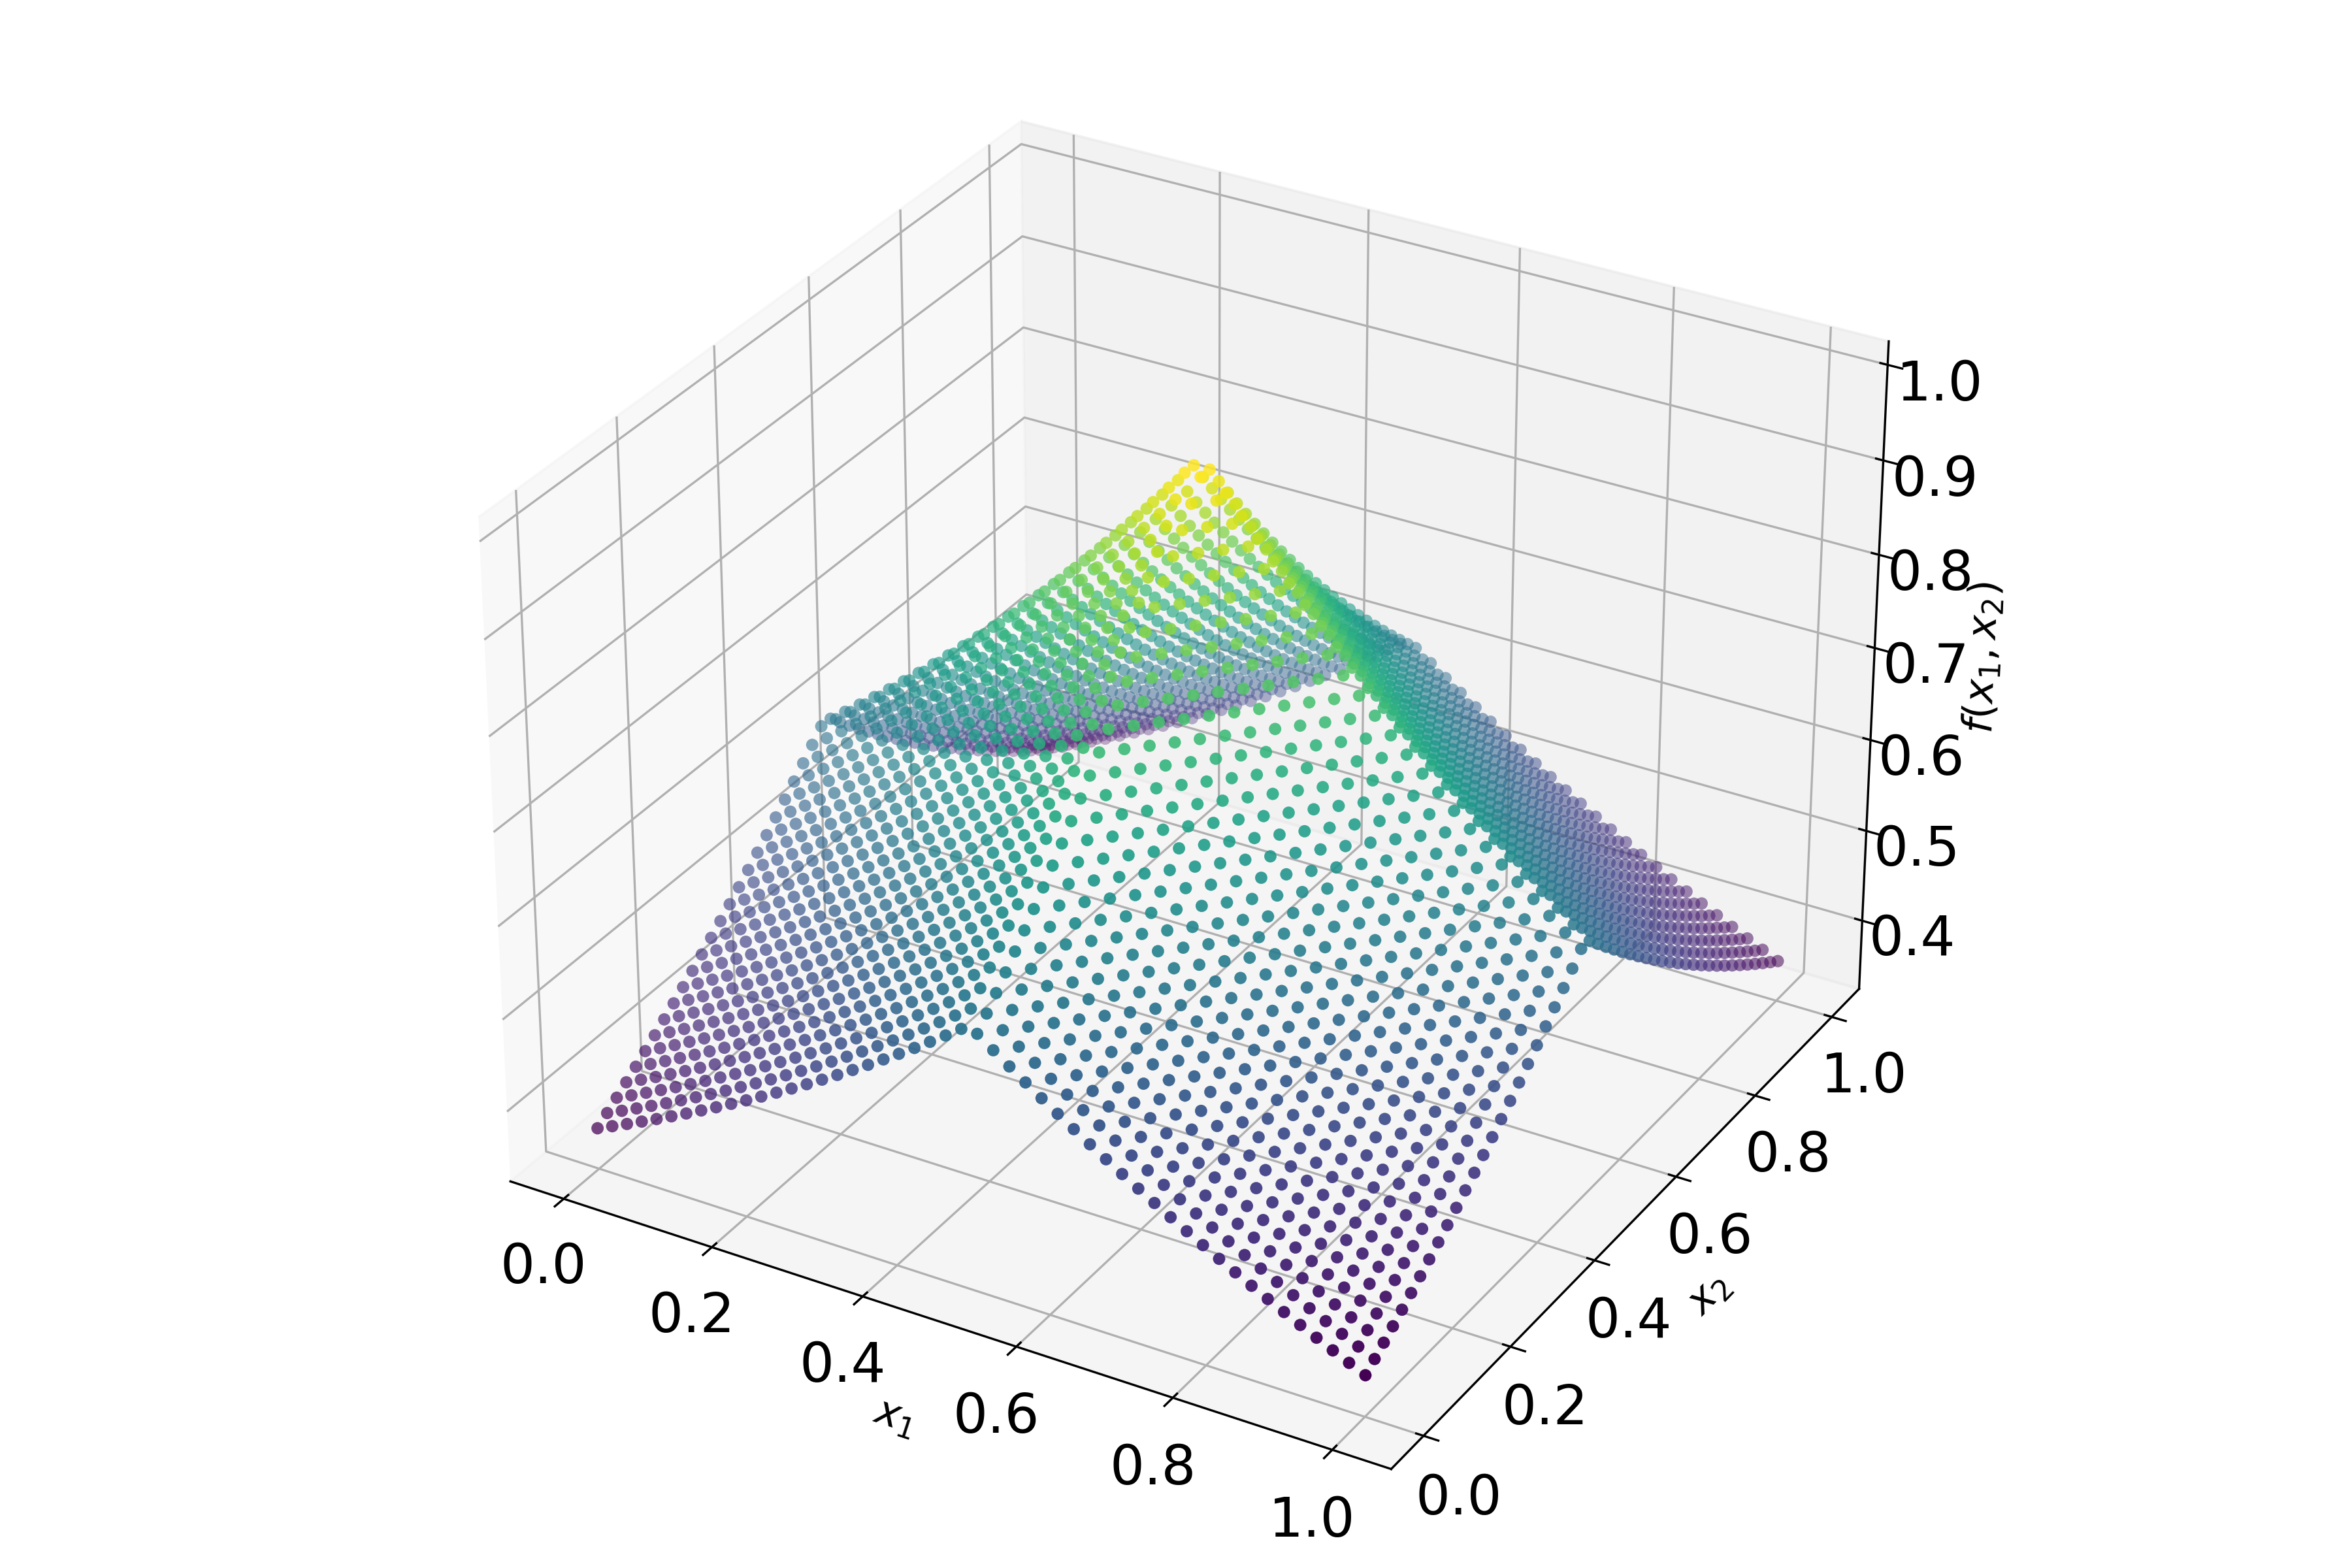 _images/fig-continuous-integrand.png